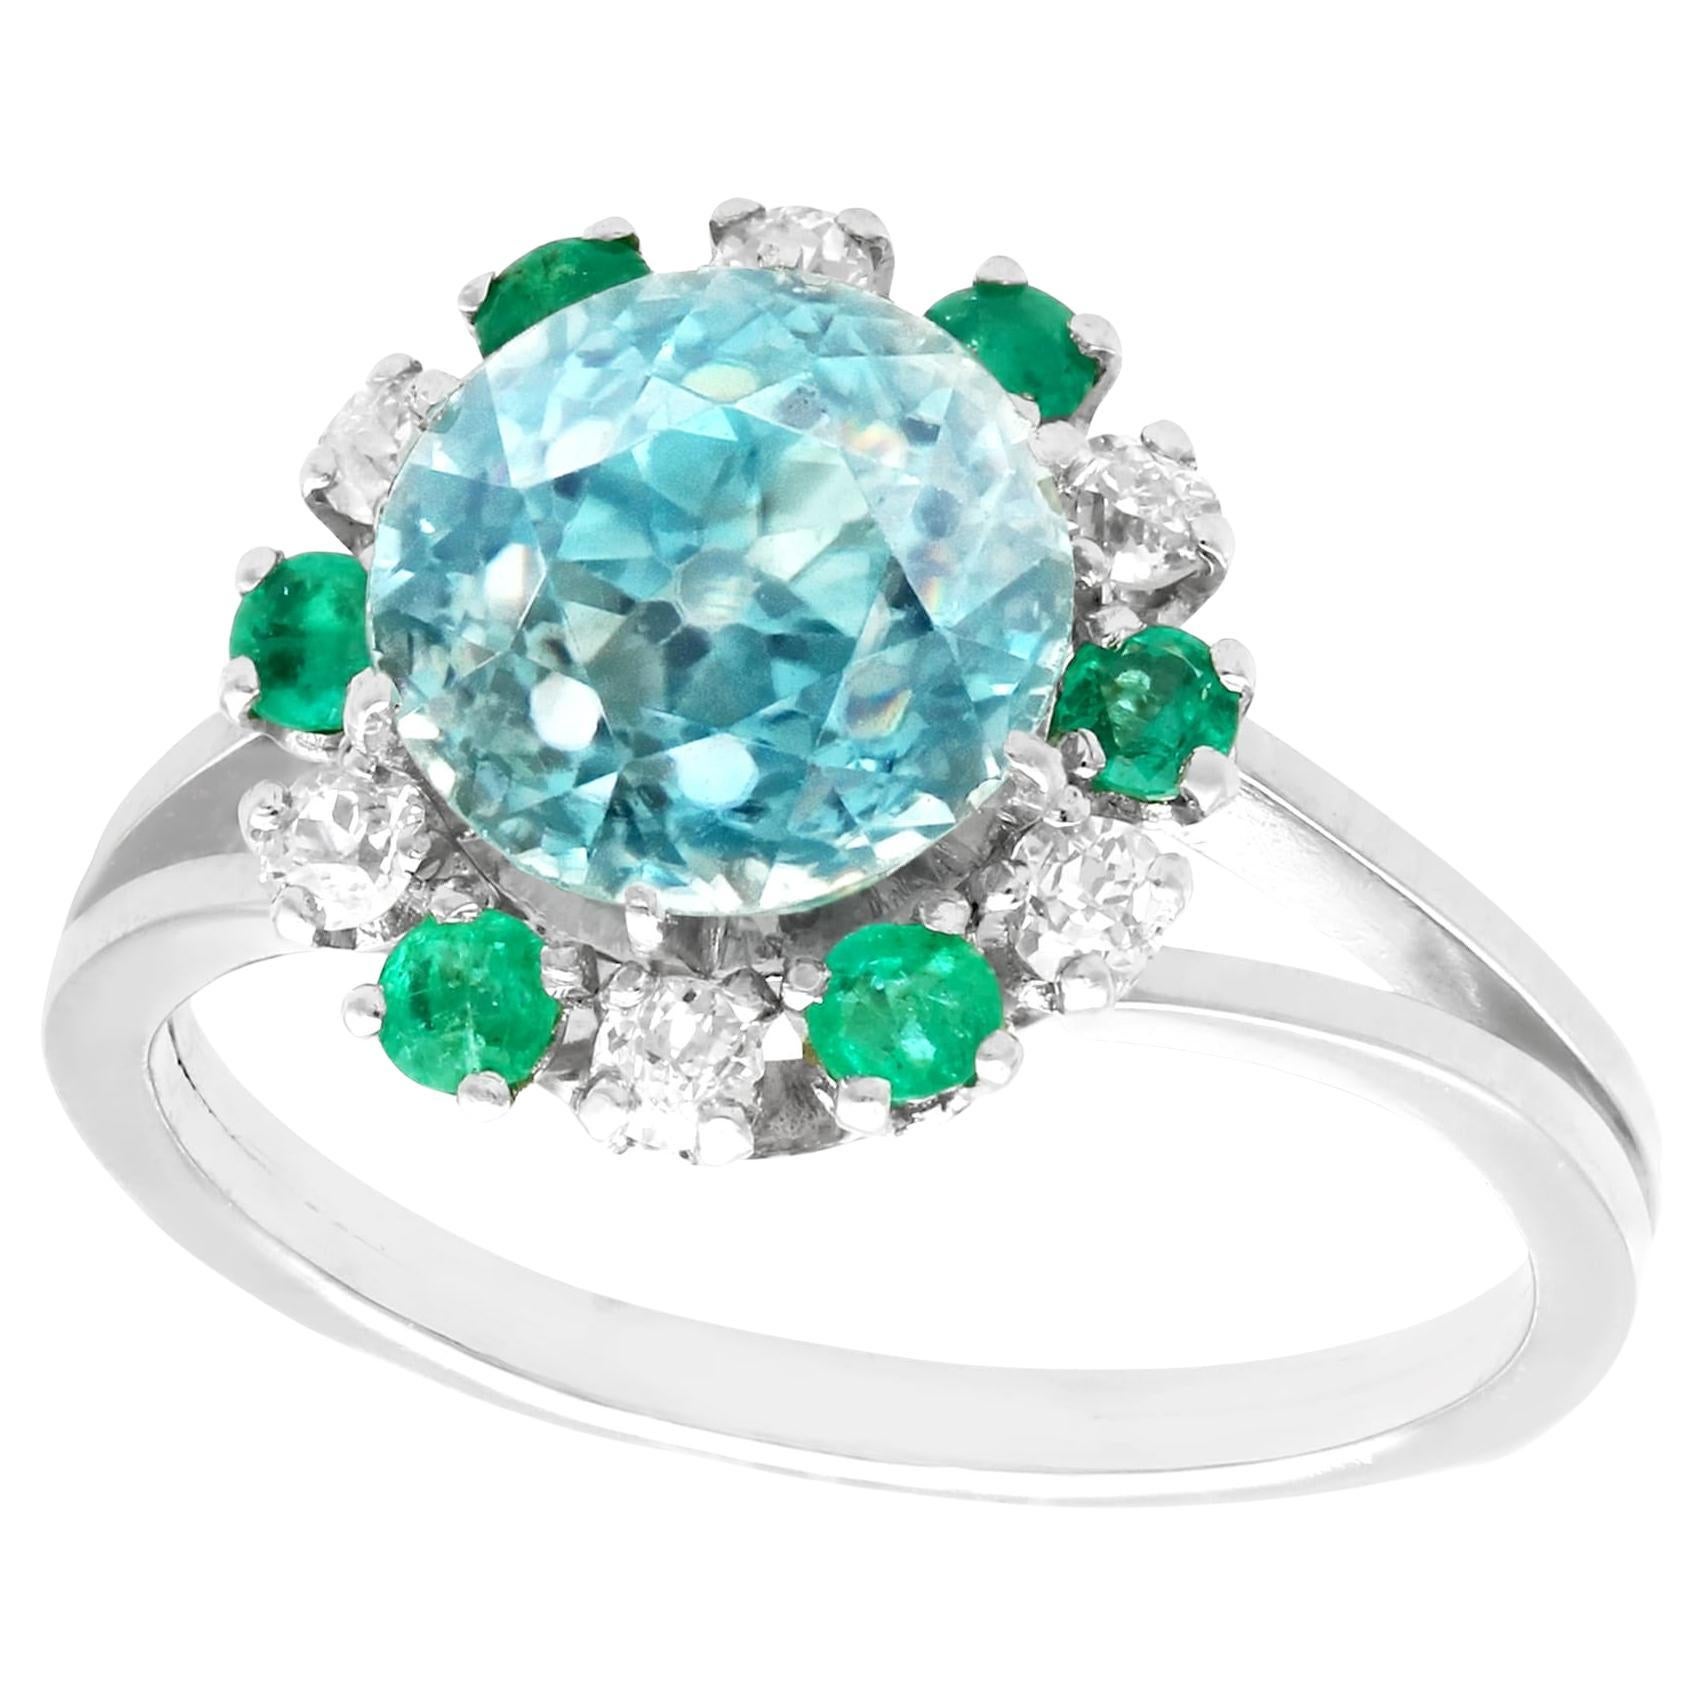 1940s French Zircon Diamond Emerald and White Gold Cocktail Ring